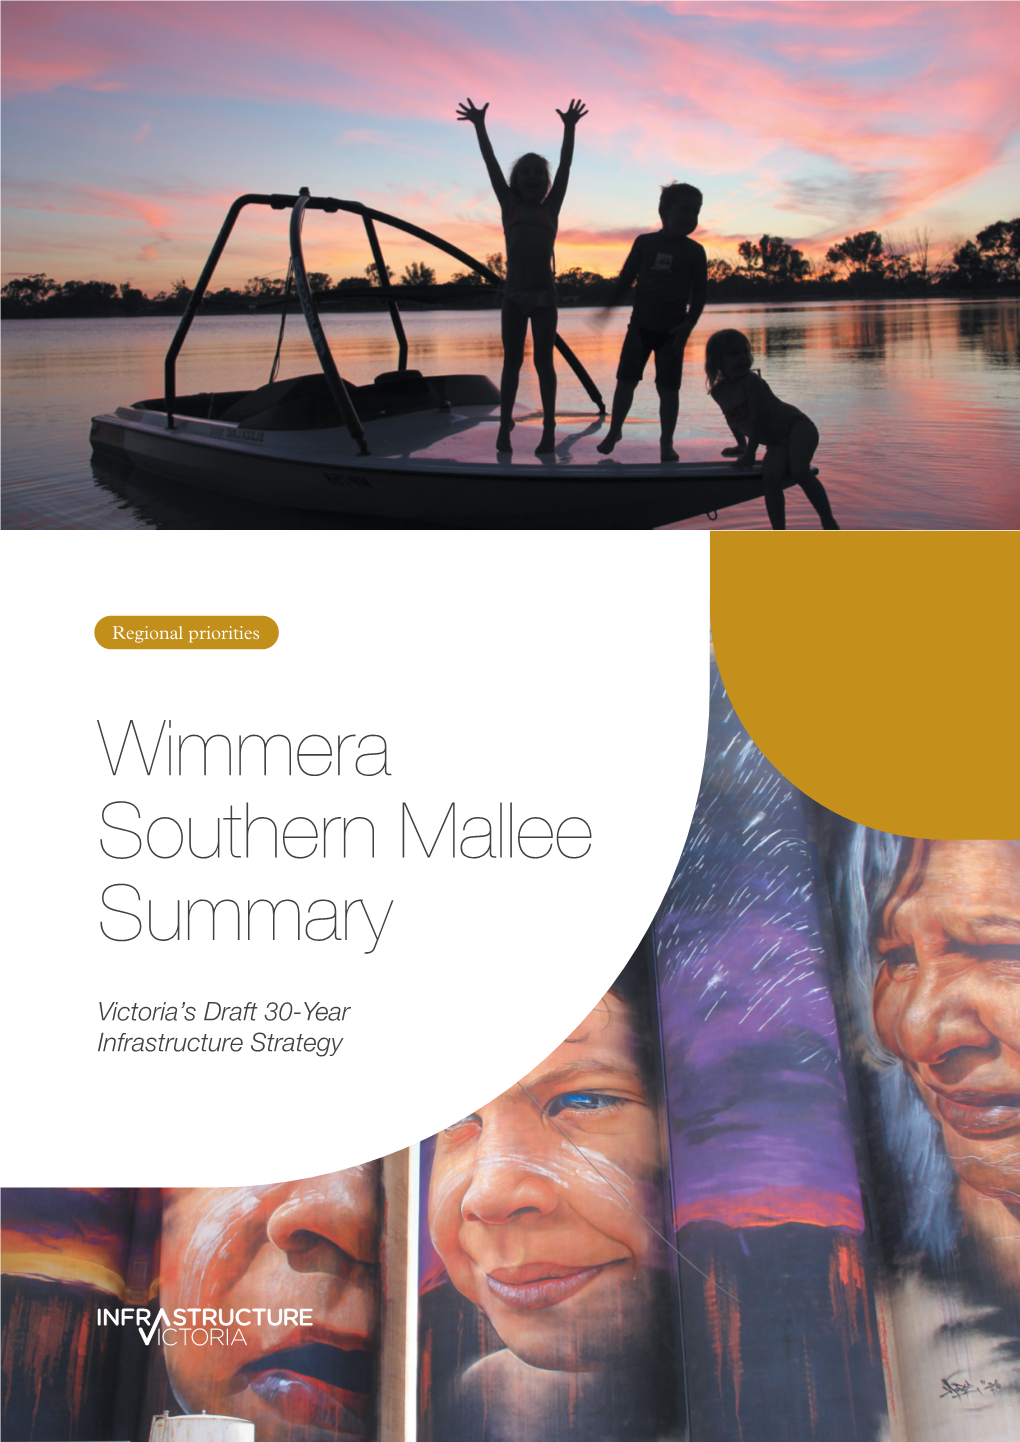 Wimmera Southern Mallee Summary